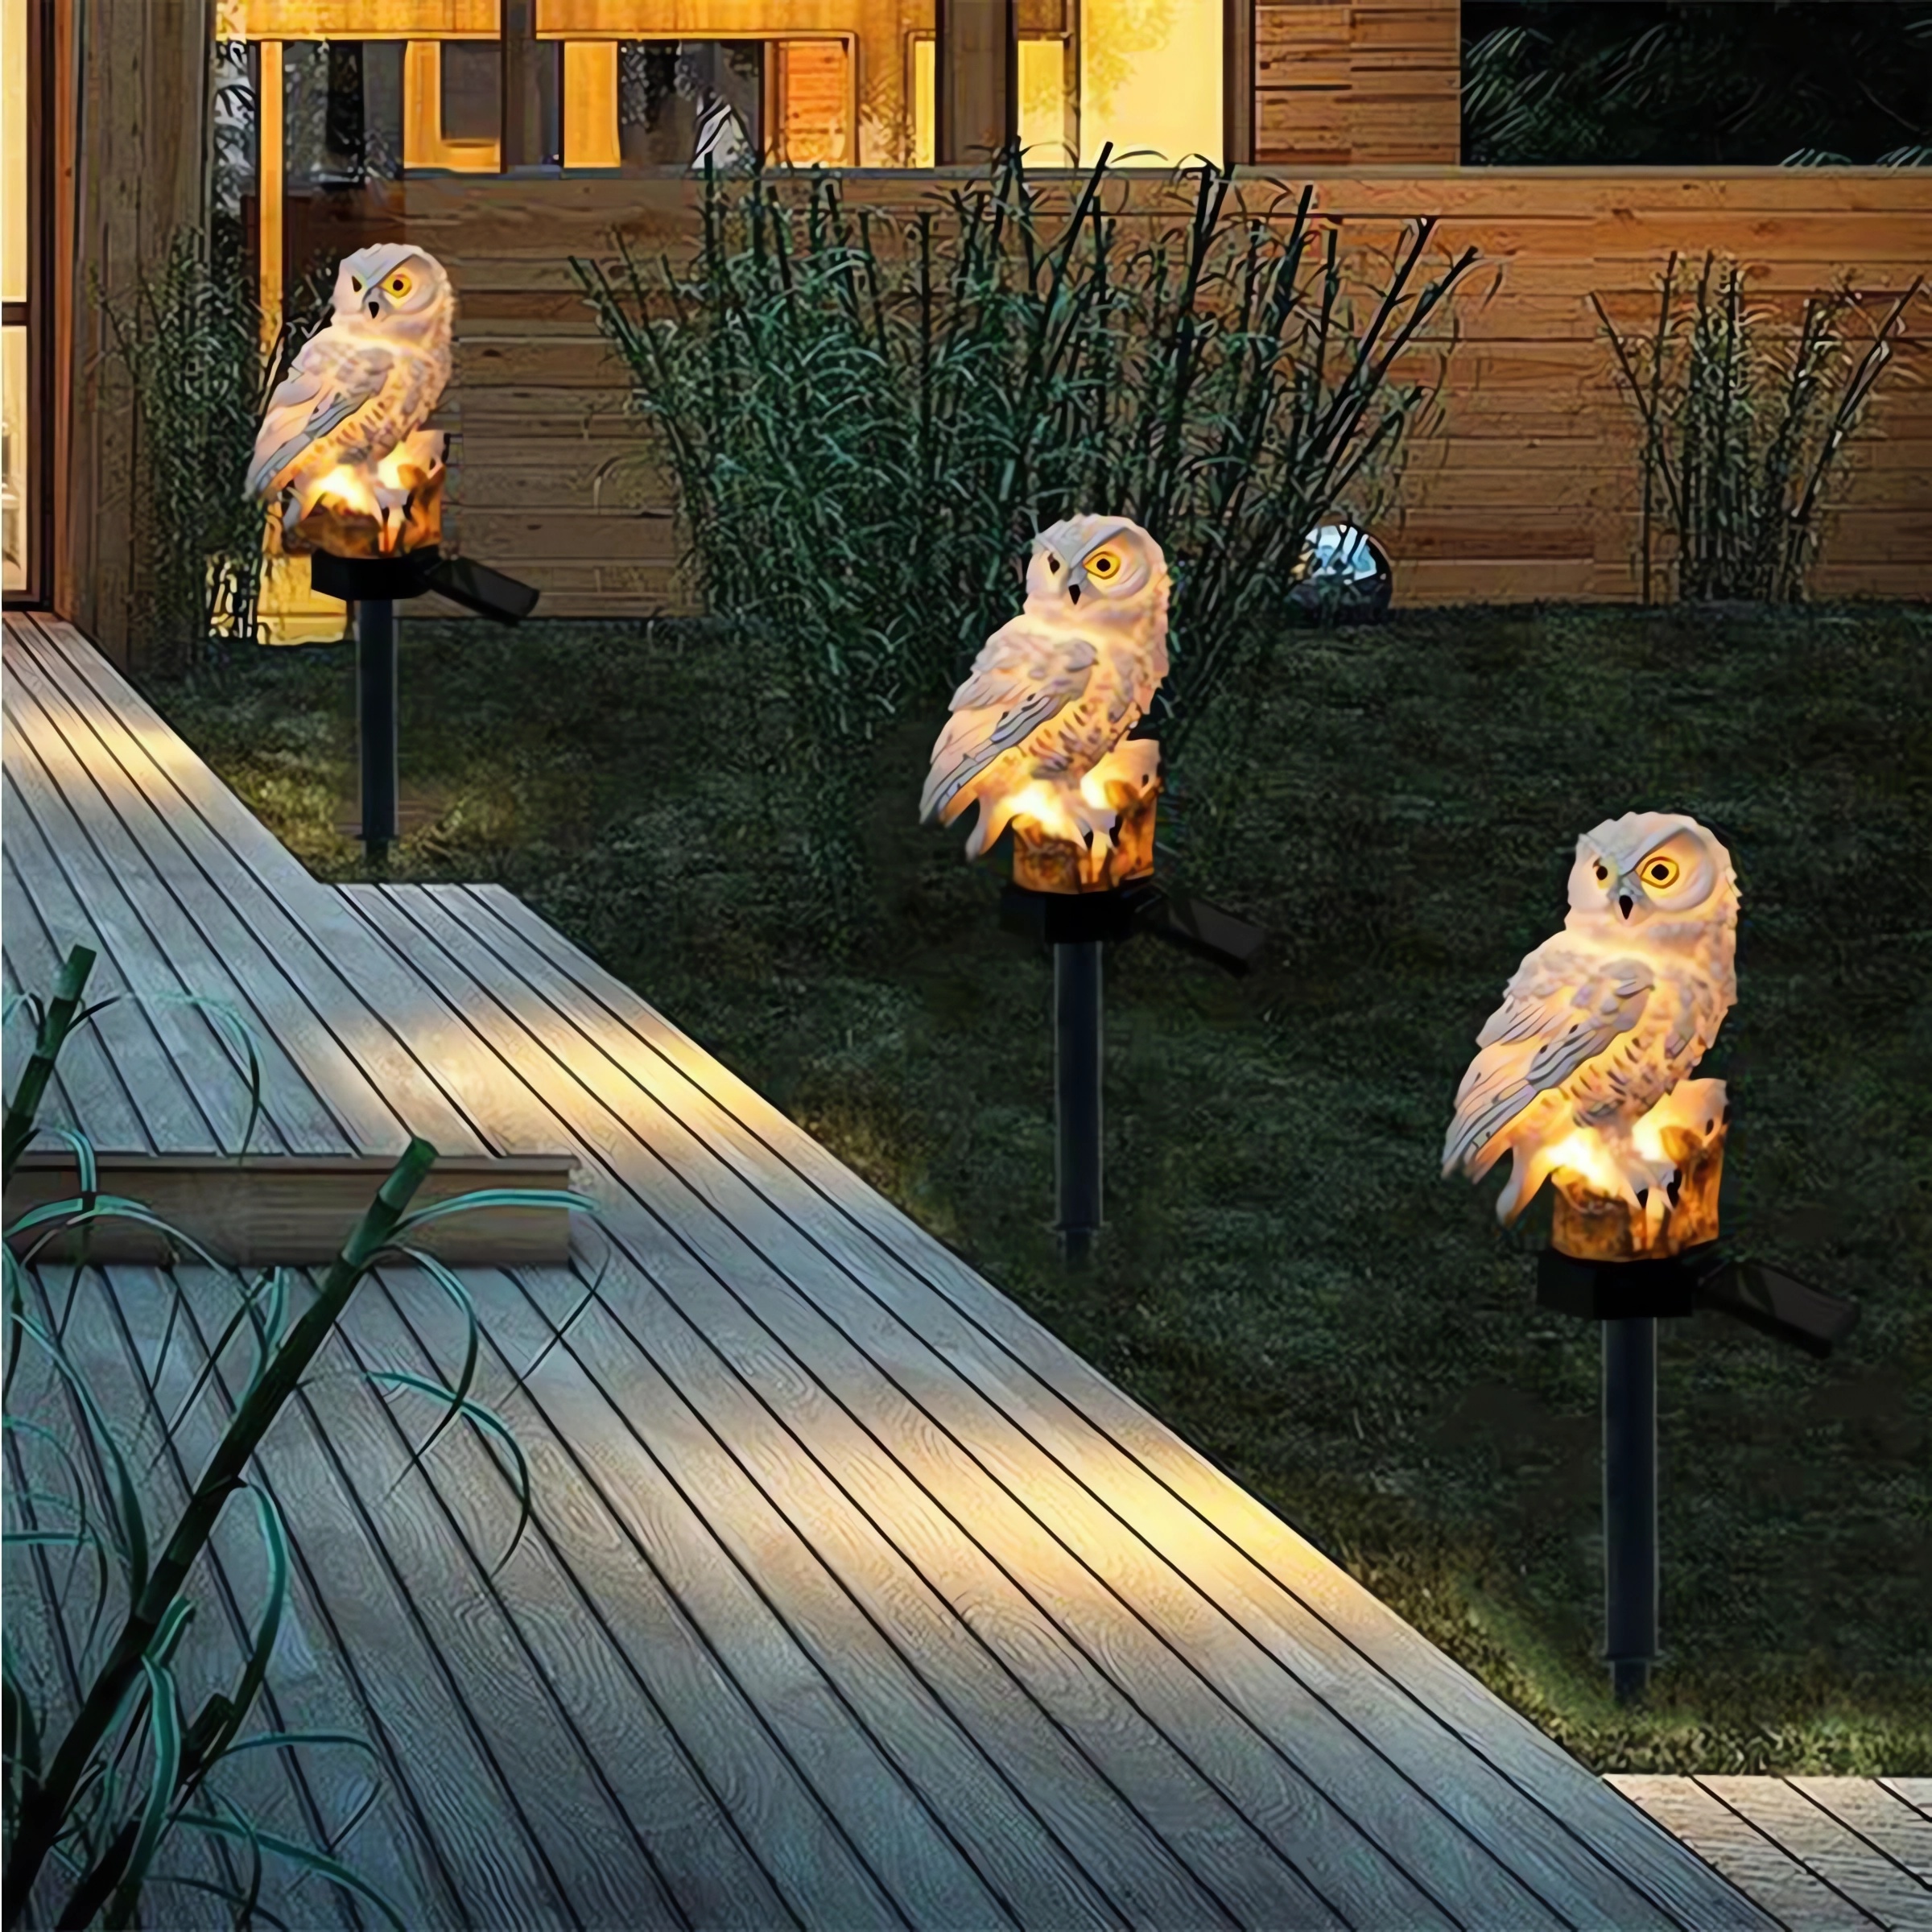 Garden Solar Lights Outdoor Decorative Resin Owl Solar LED Lights with Stake for Garden Lawn Pathway Yard Decortions - image 3 of 8